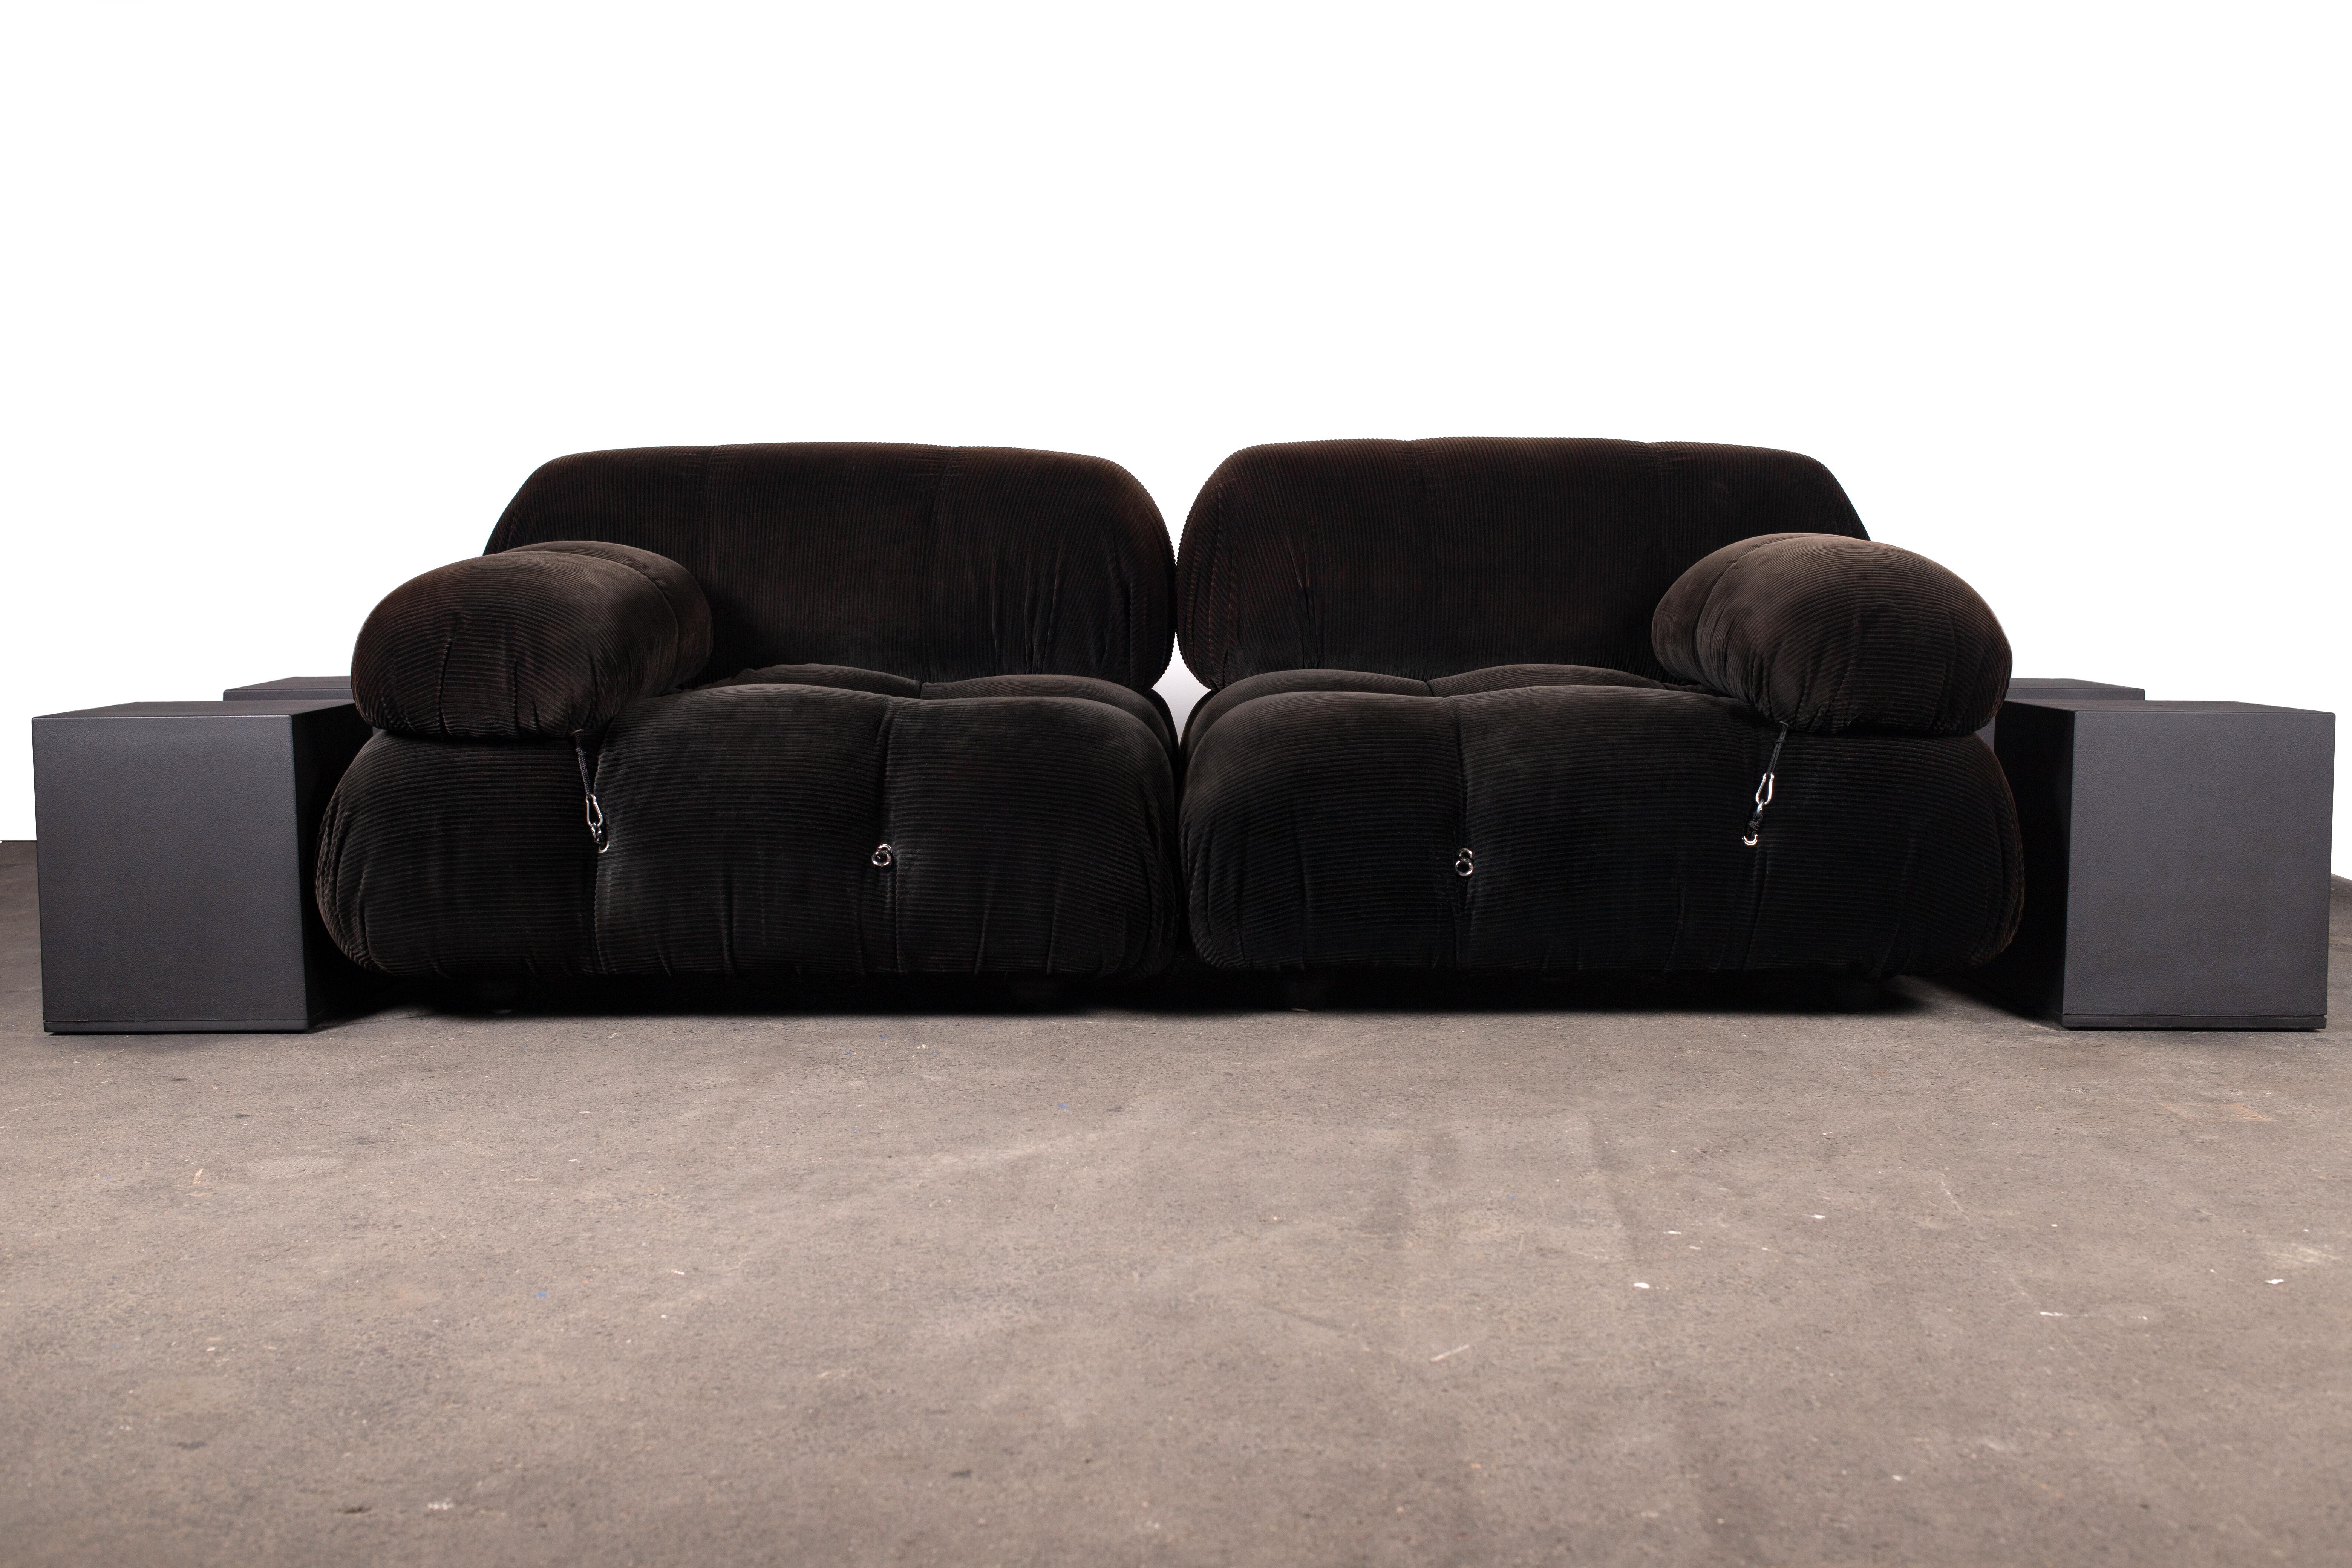 Historical and original early Organic Modern C&B Italia (now B&B Italia) 2-piece Camaleonda sectional sofa by Mario Bellini in black cord fabric. Consists of two lounge chairs of the largest 3x3 format in the series. Both have back rests and one arm